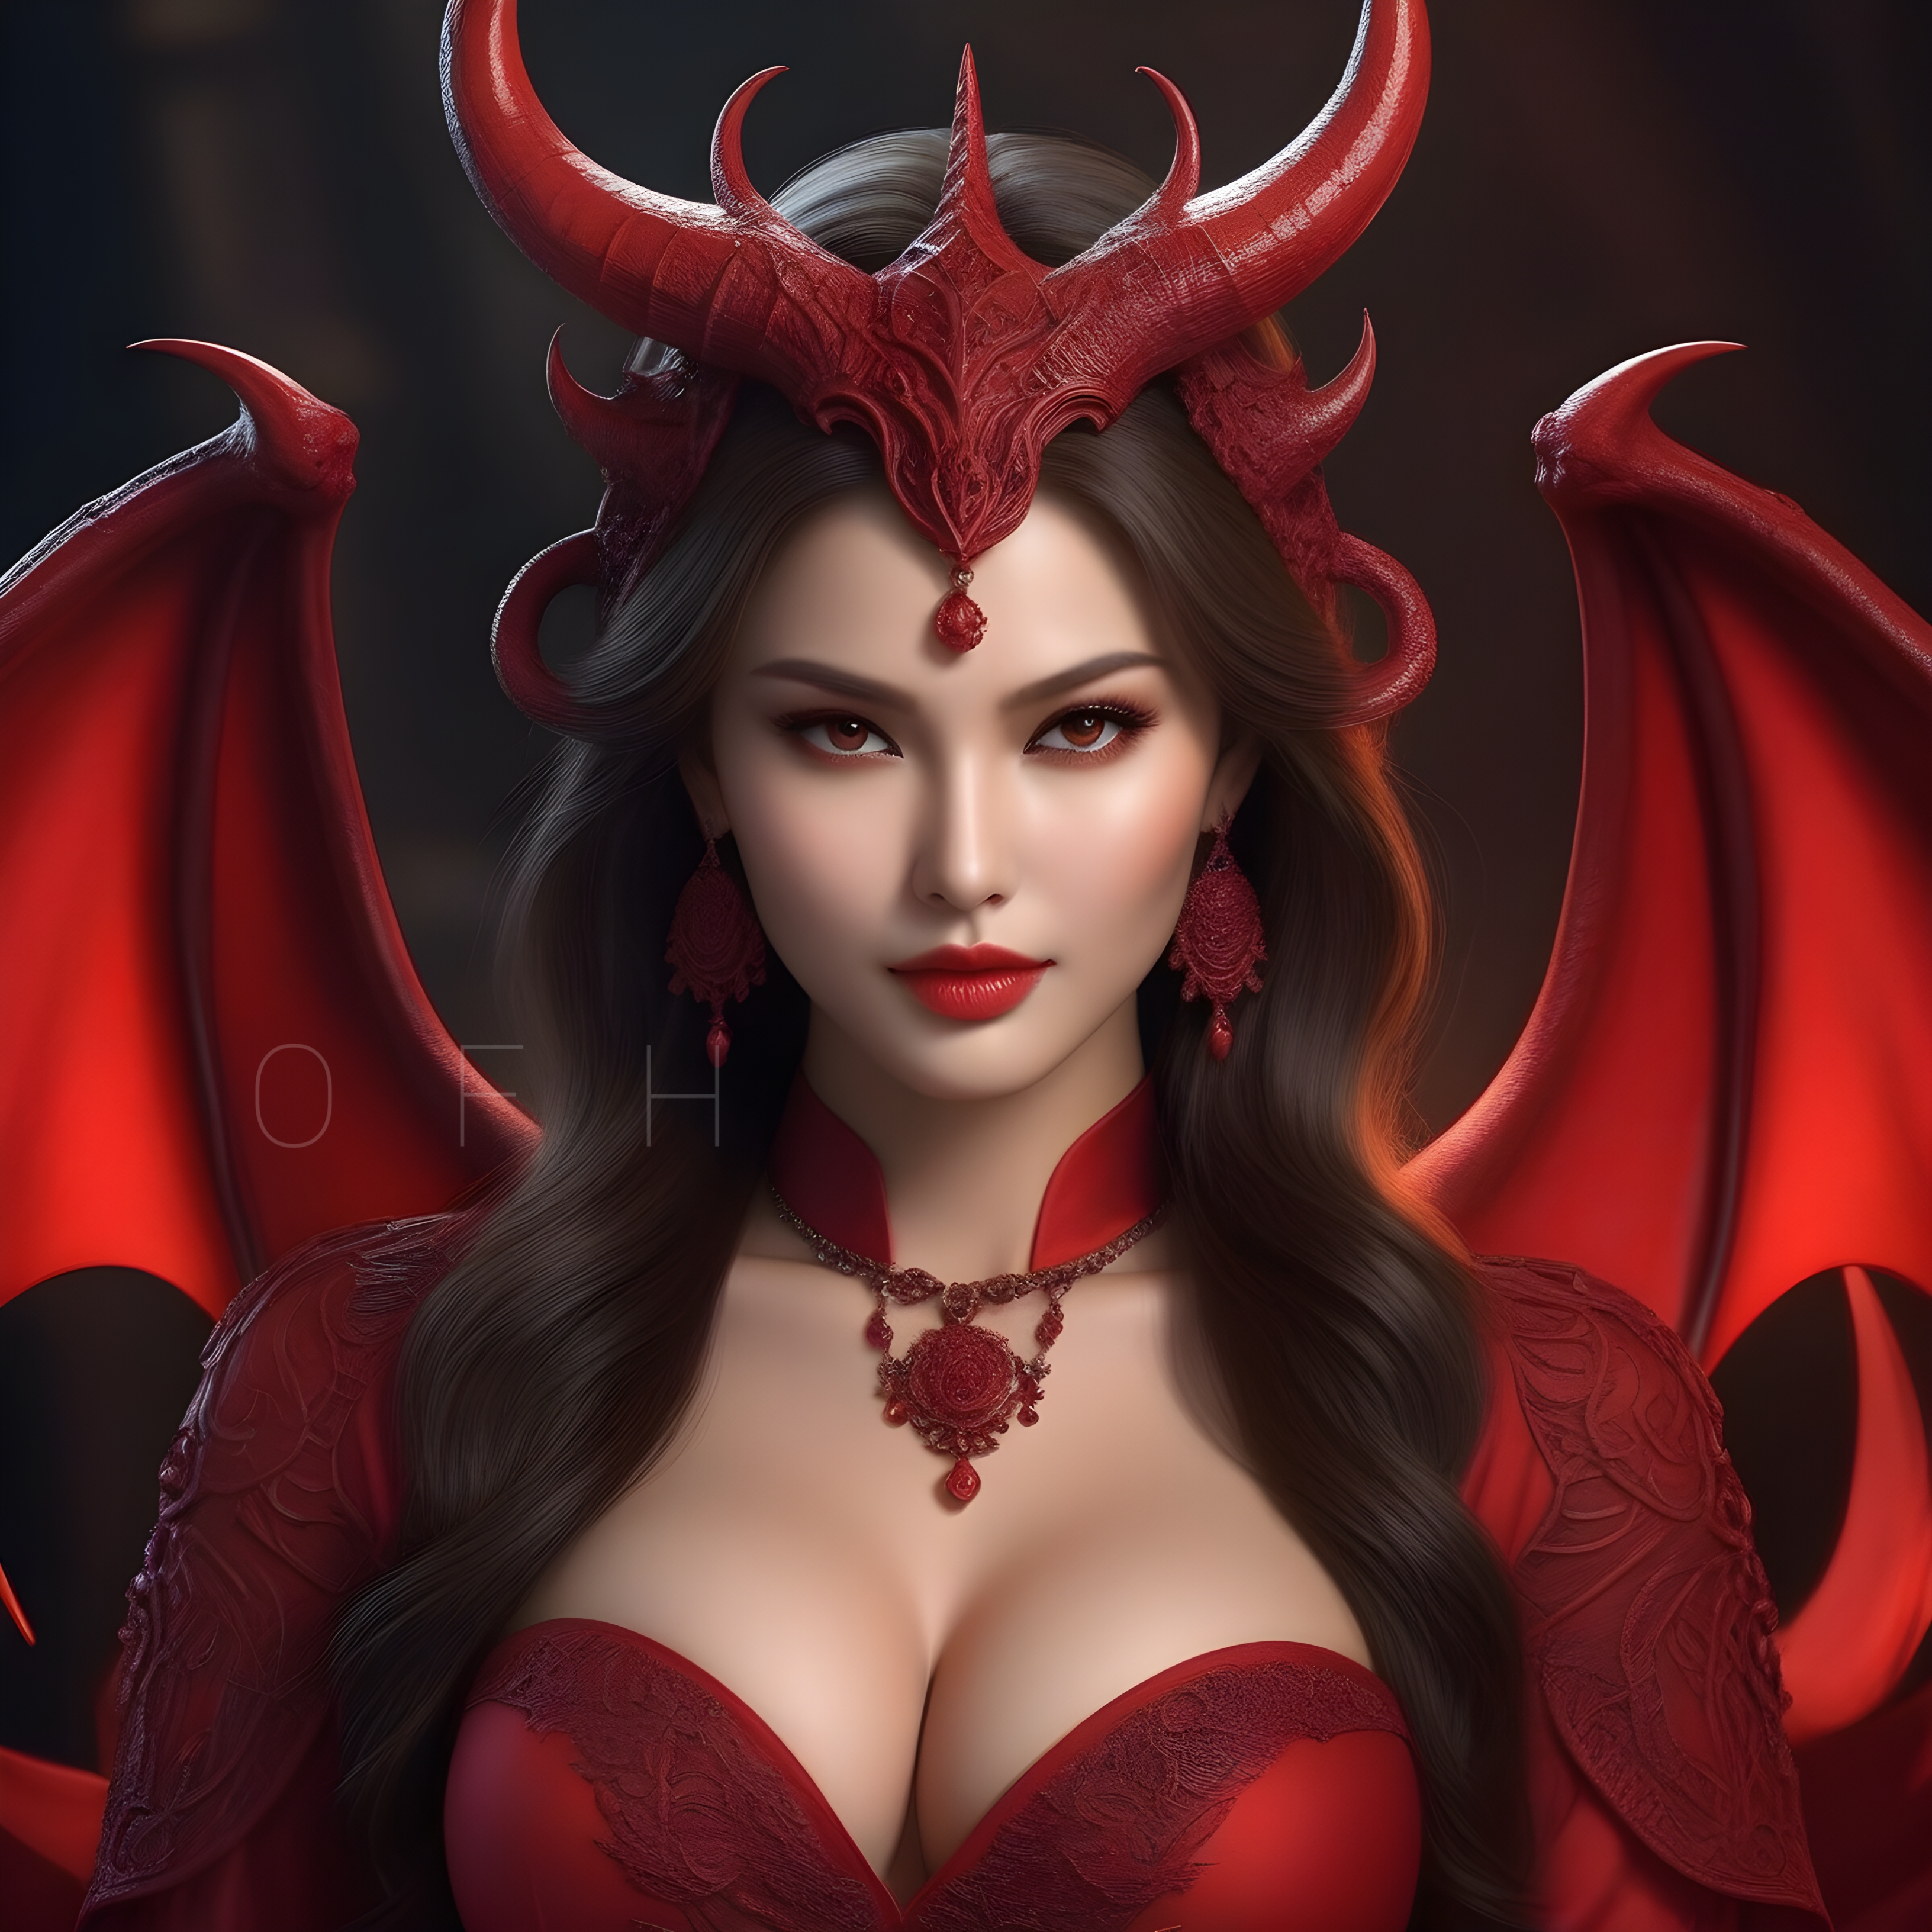 General 3264x3264 AI art OneFinalHug digital art portrait display looking at viewer long hair fantasy art cleavage horns closed mouth red lipstick lipstick earring demon girls wings demon horns blurred blurry background